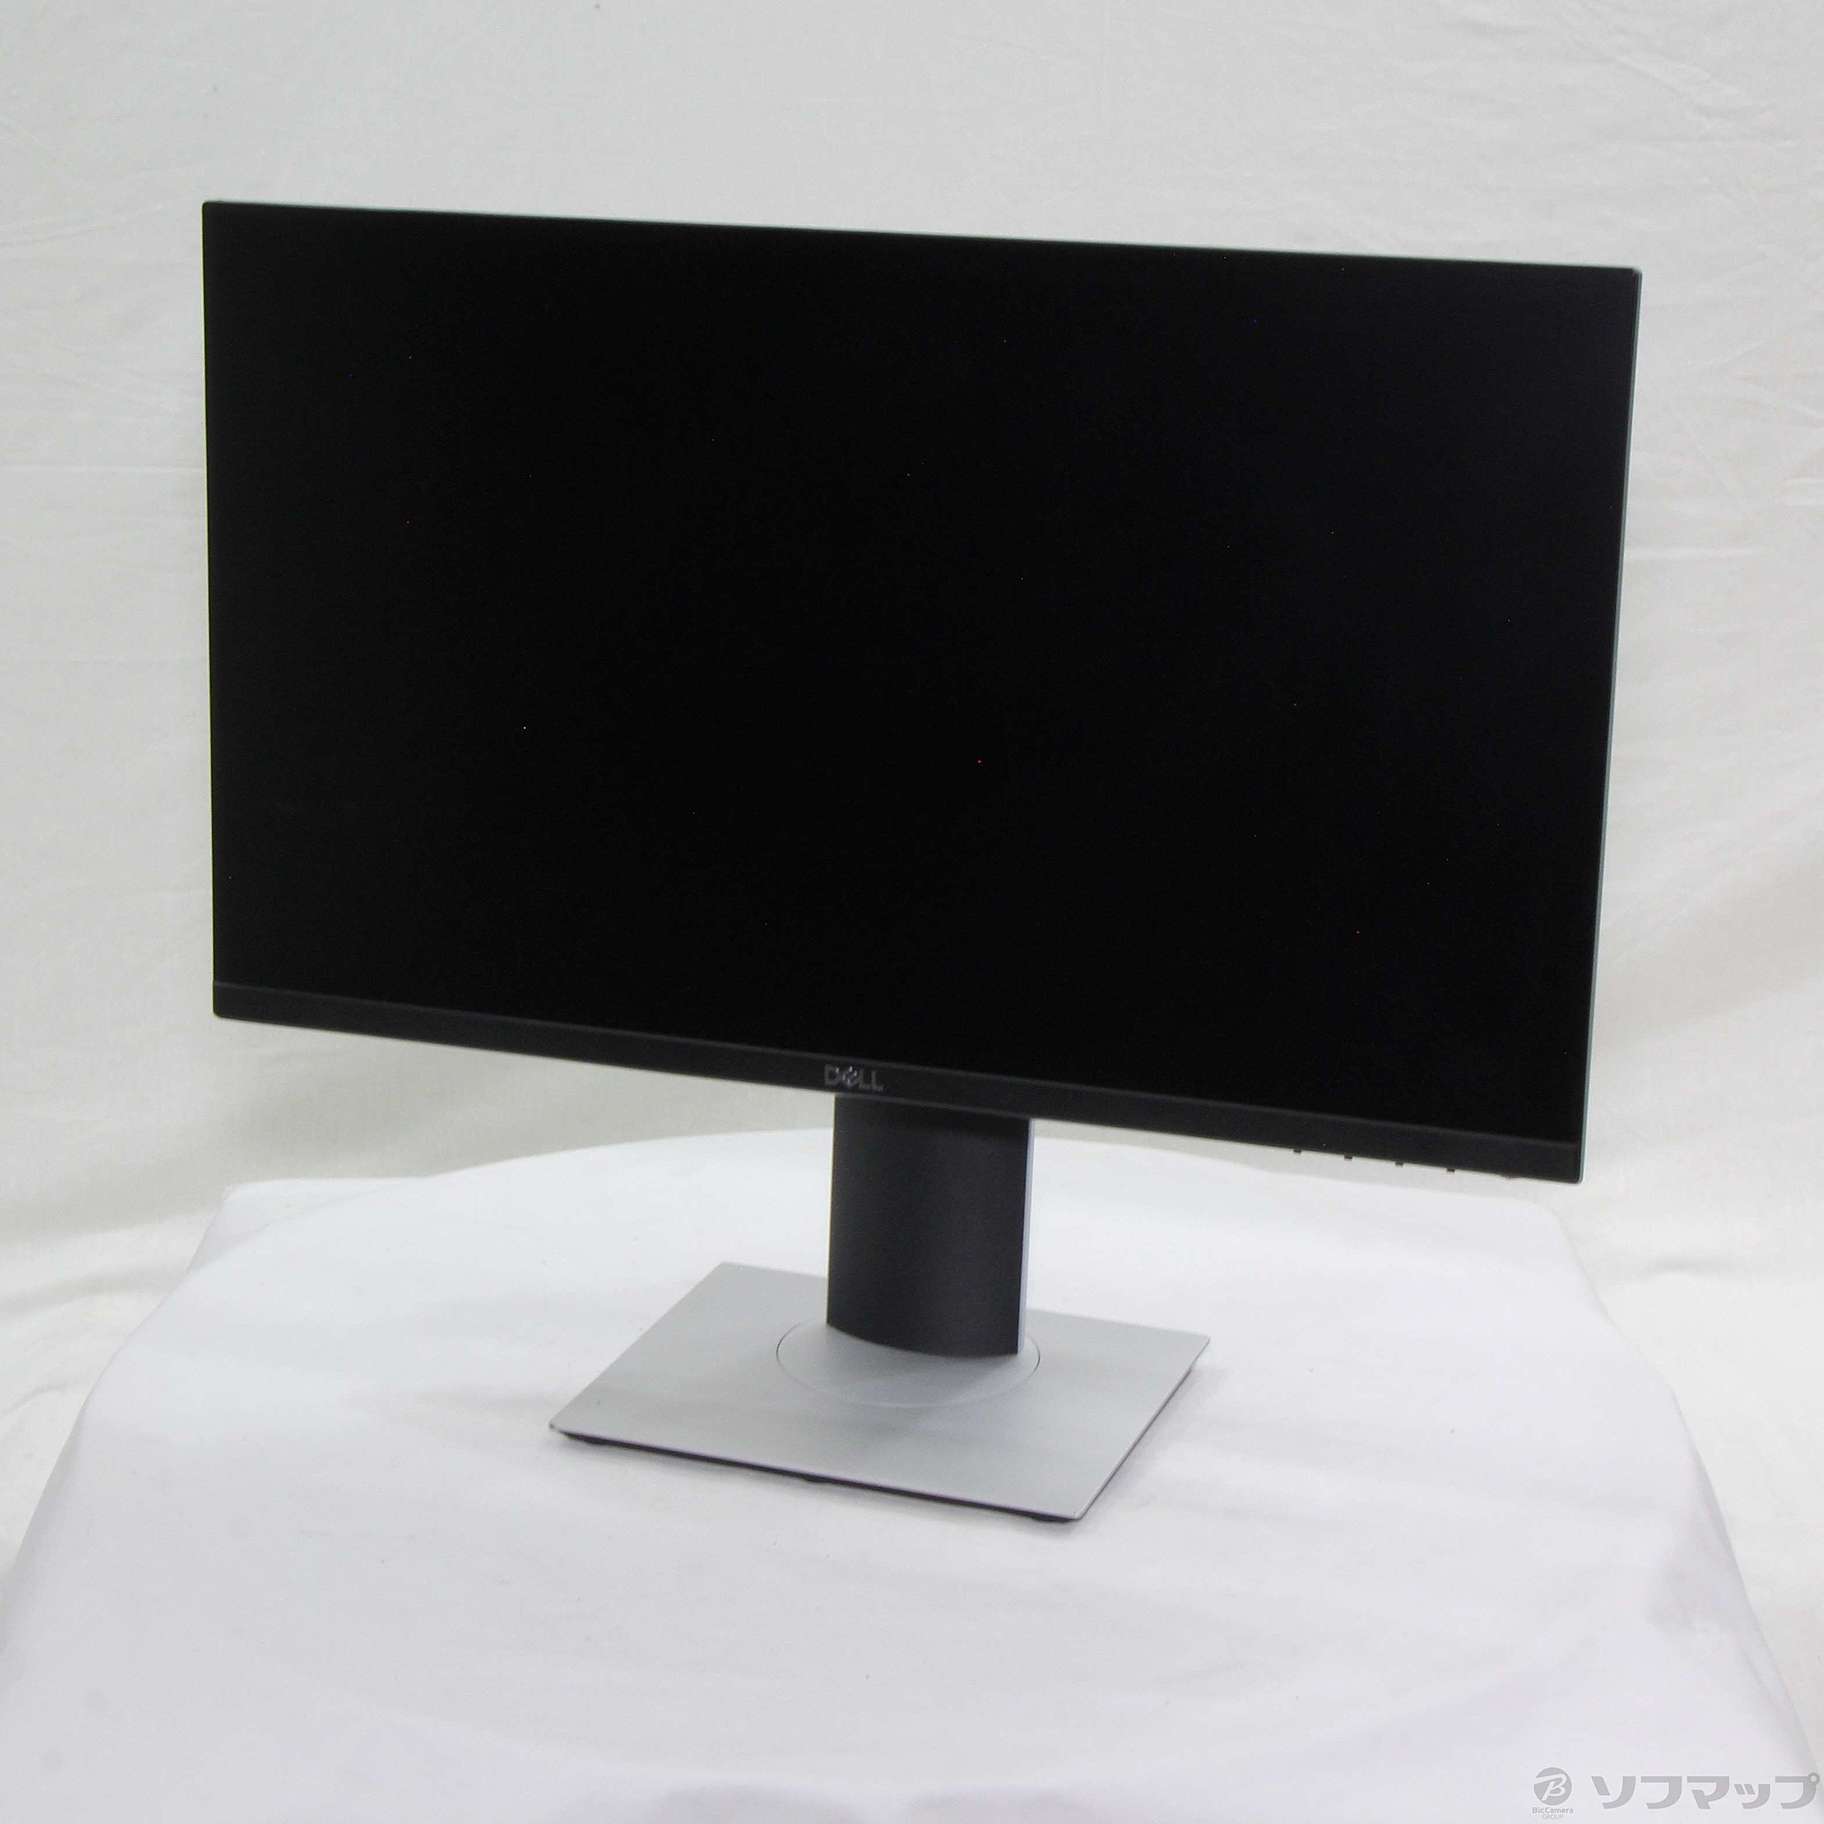 DELL S2319HS